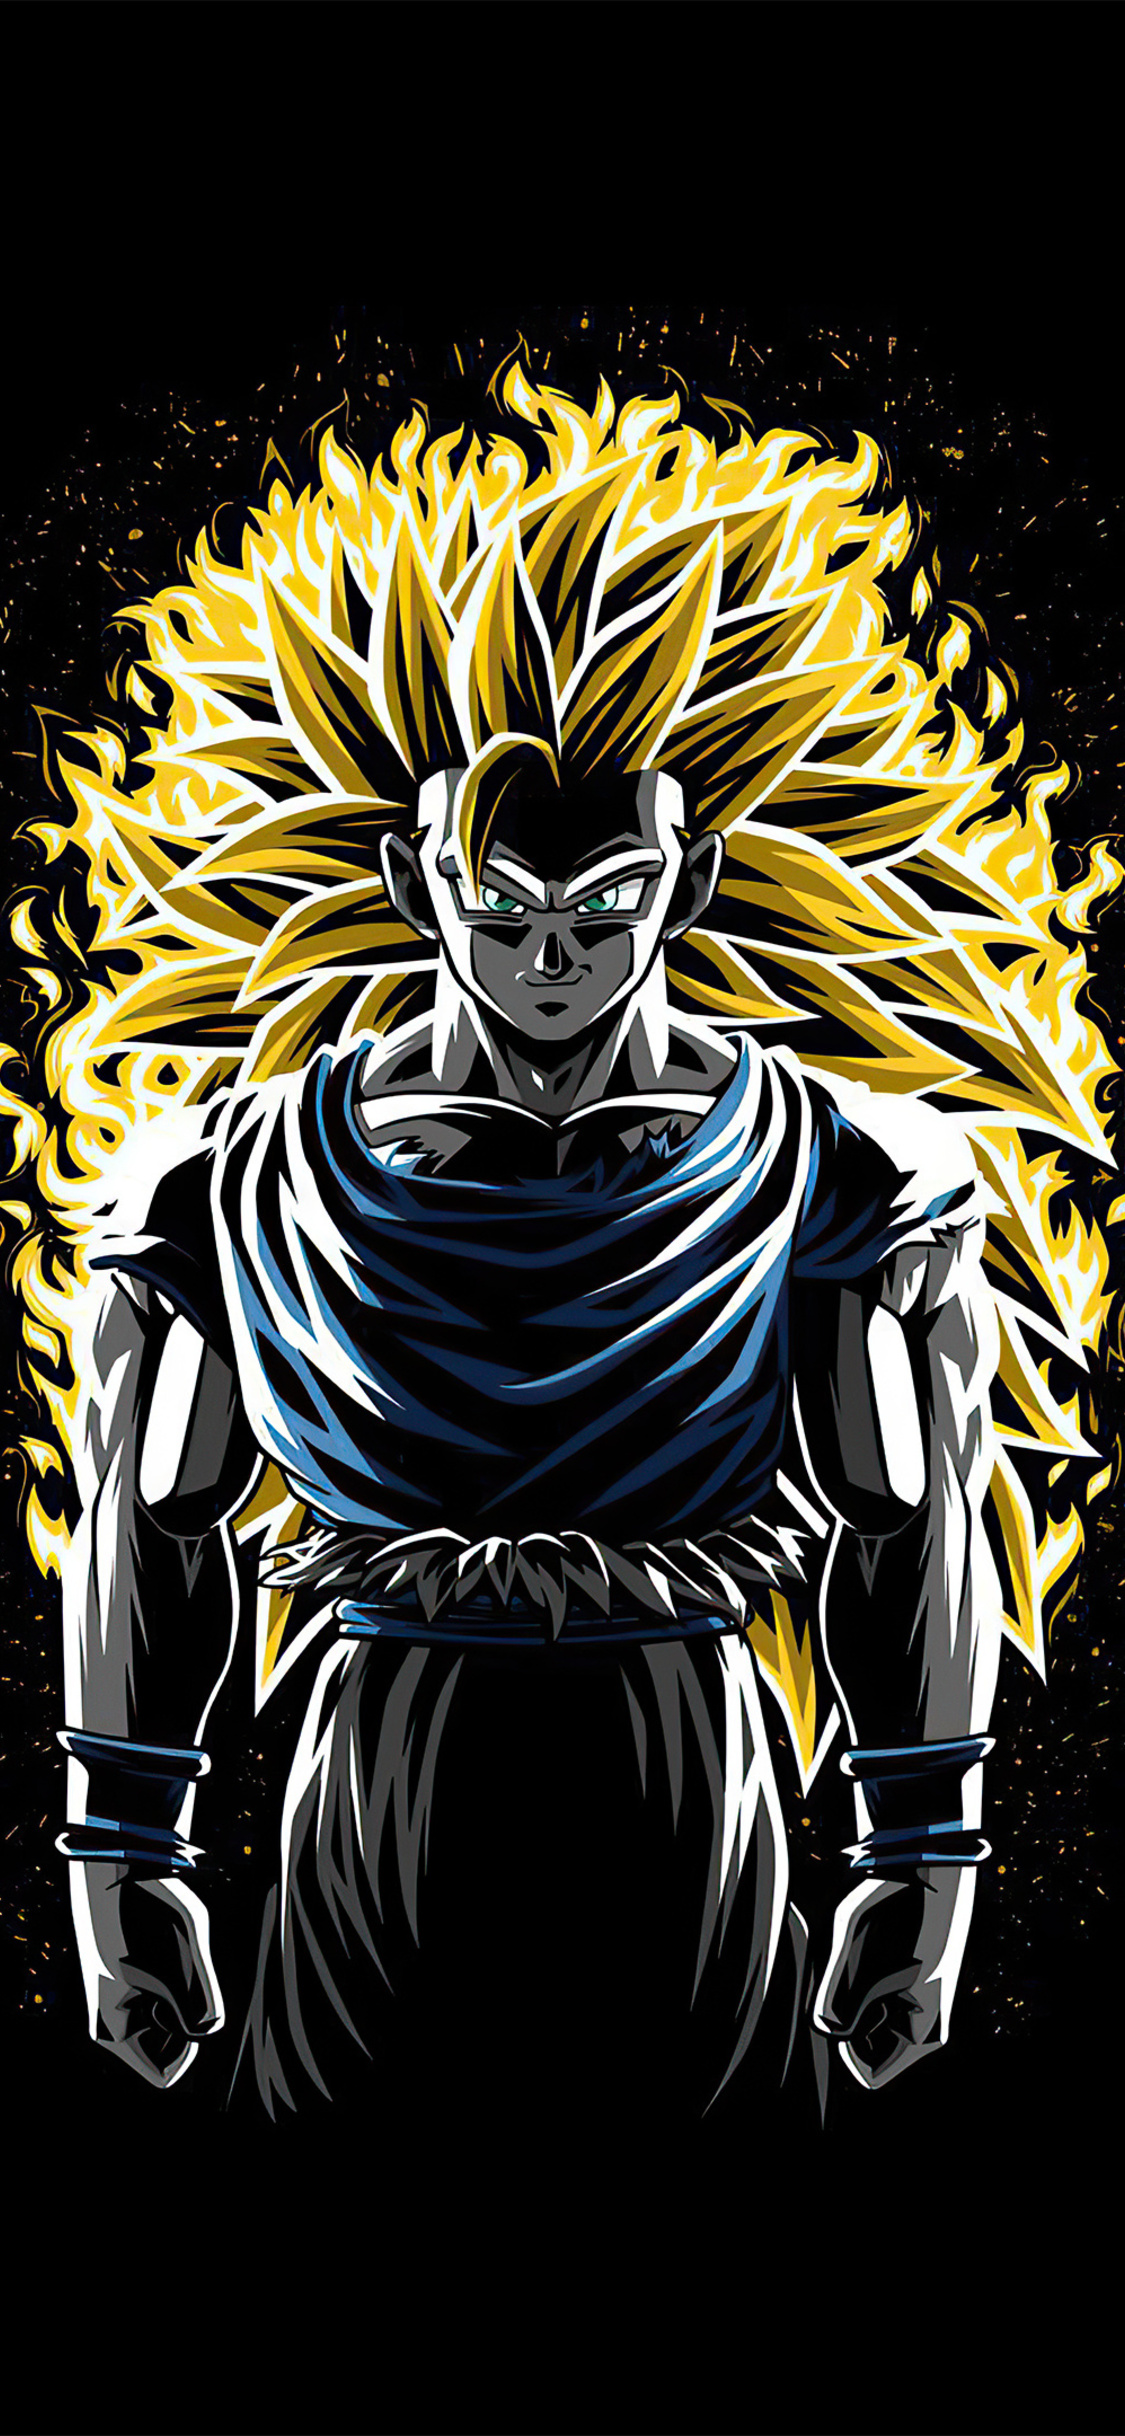 1125x2436 Battle Fire Super Saiyan 3 Goku Dragon Ball Z Iphone XS,Iphone  10,Iphone X HD 4k Wallpapers, Images, Backgrounds, Photos and Pictures